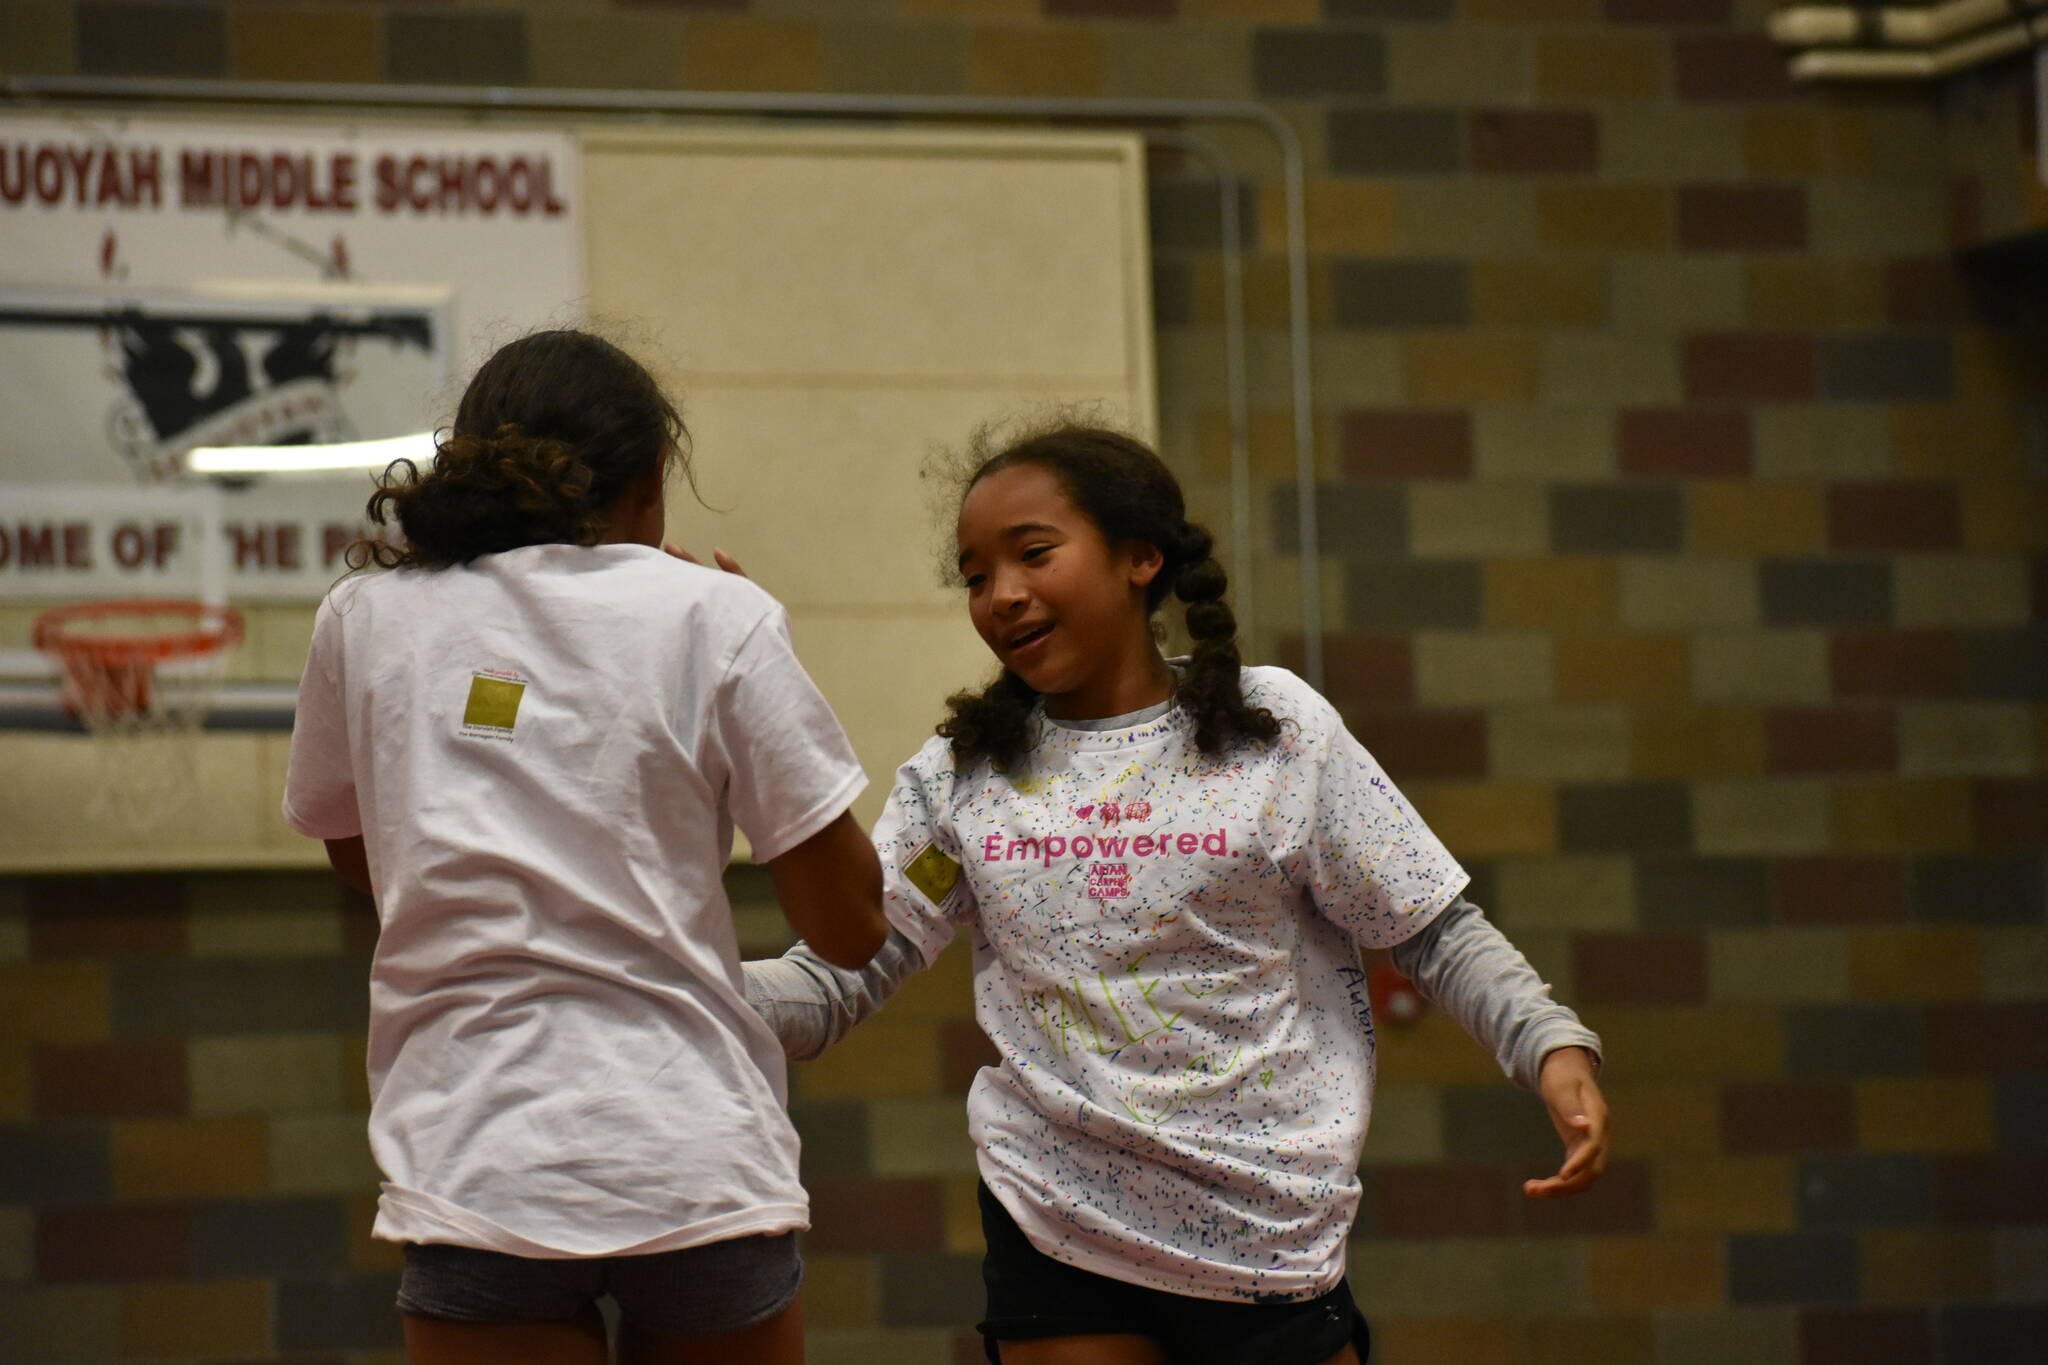 Two campers laugh after their battle on the mat. (Photos by Ben Ray / The Mirror)